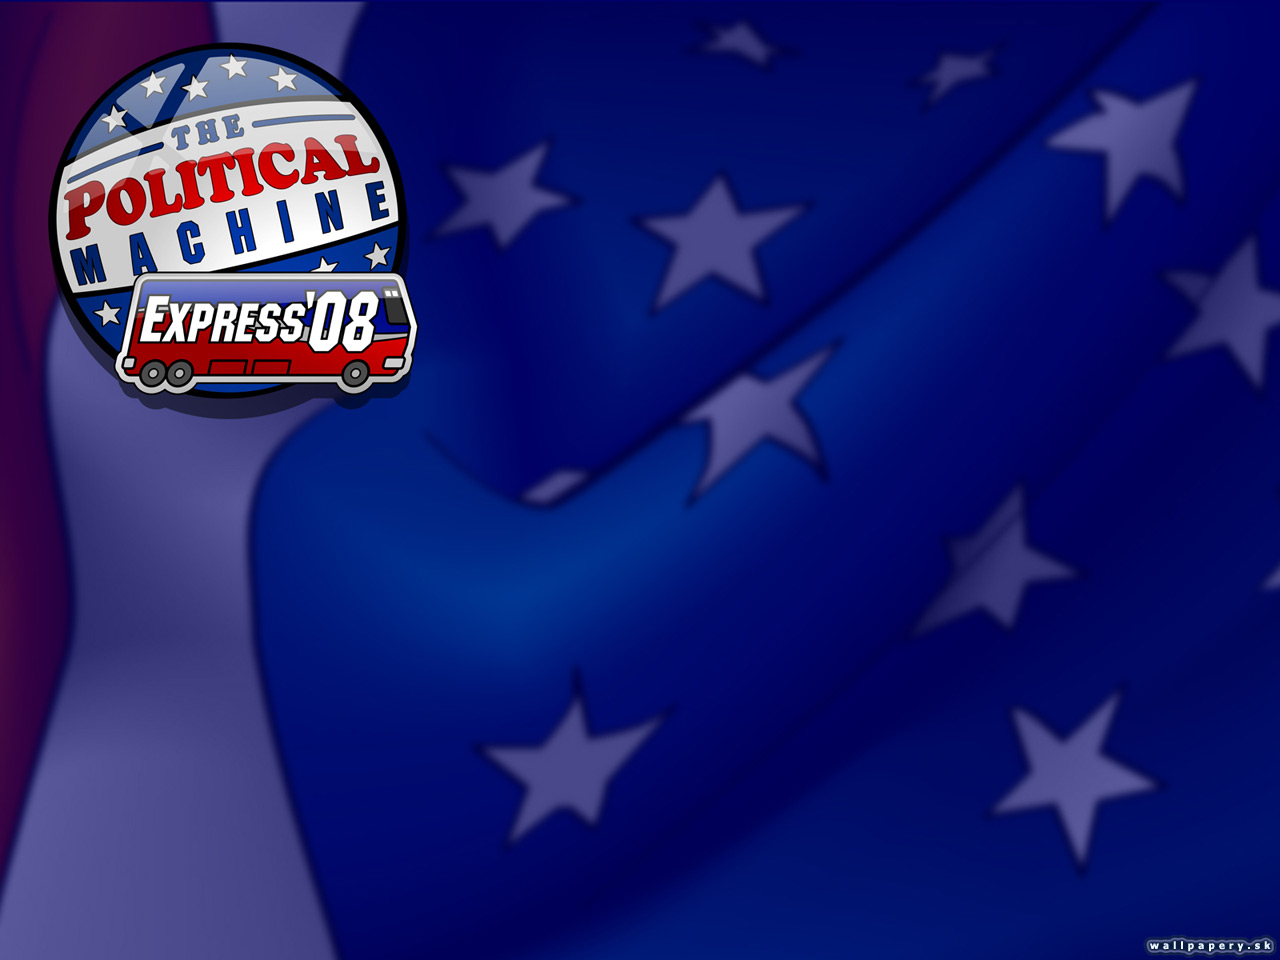 The Political Machine 2008 Express Edition - wallpaper 4